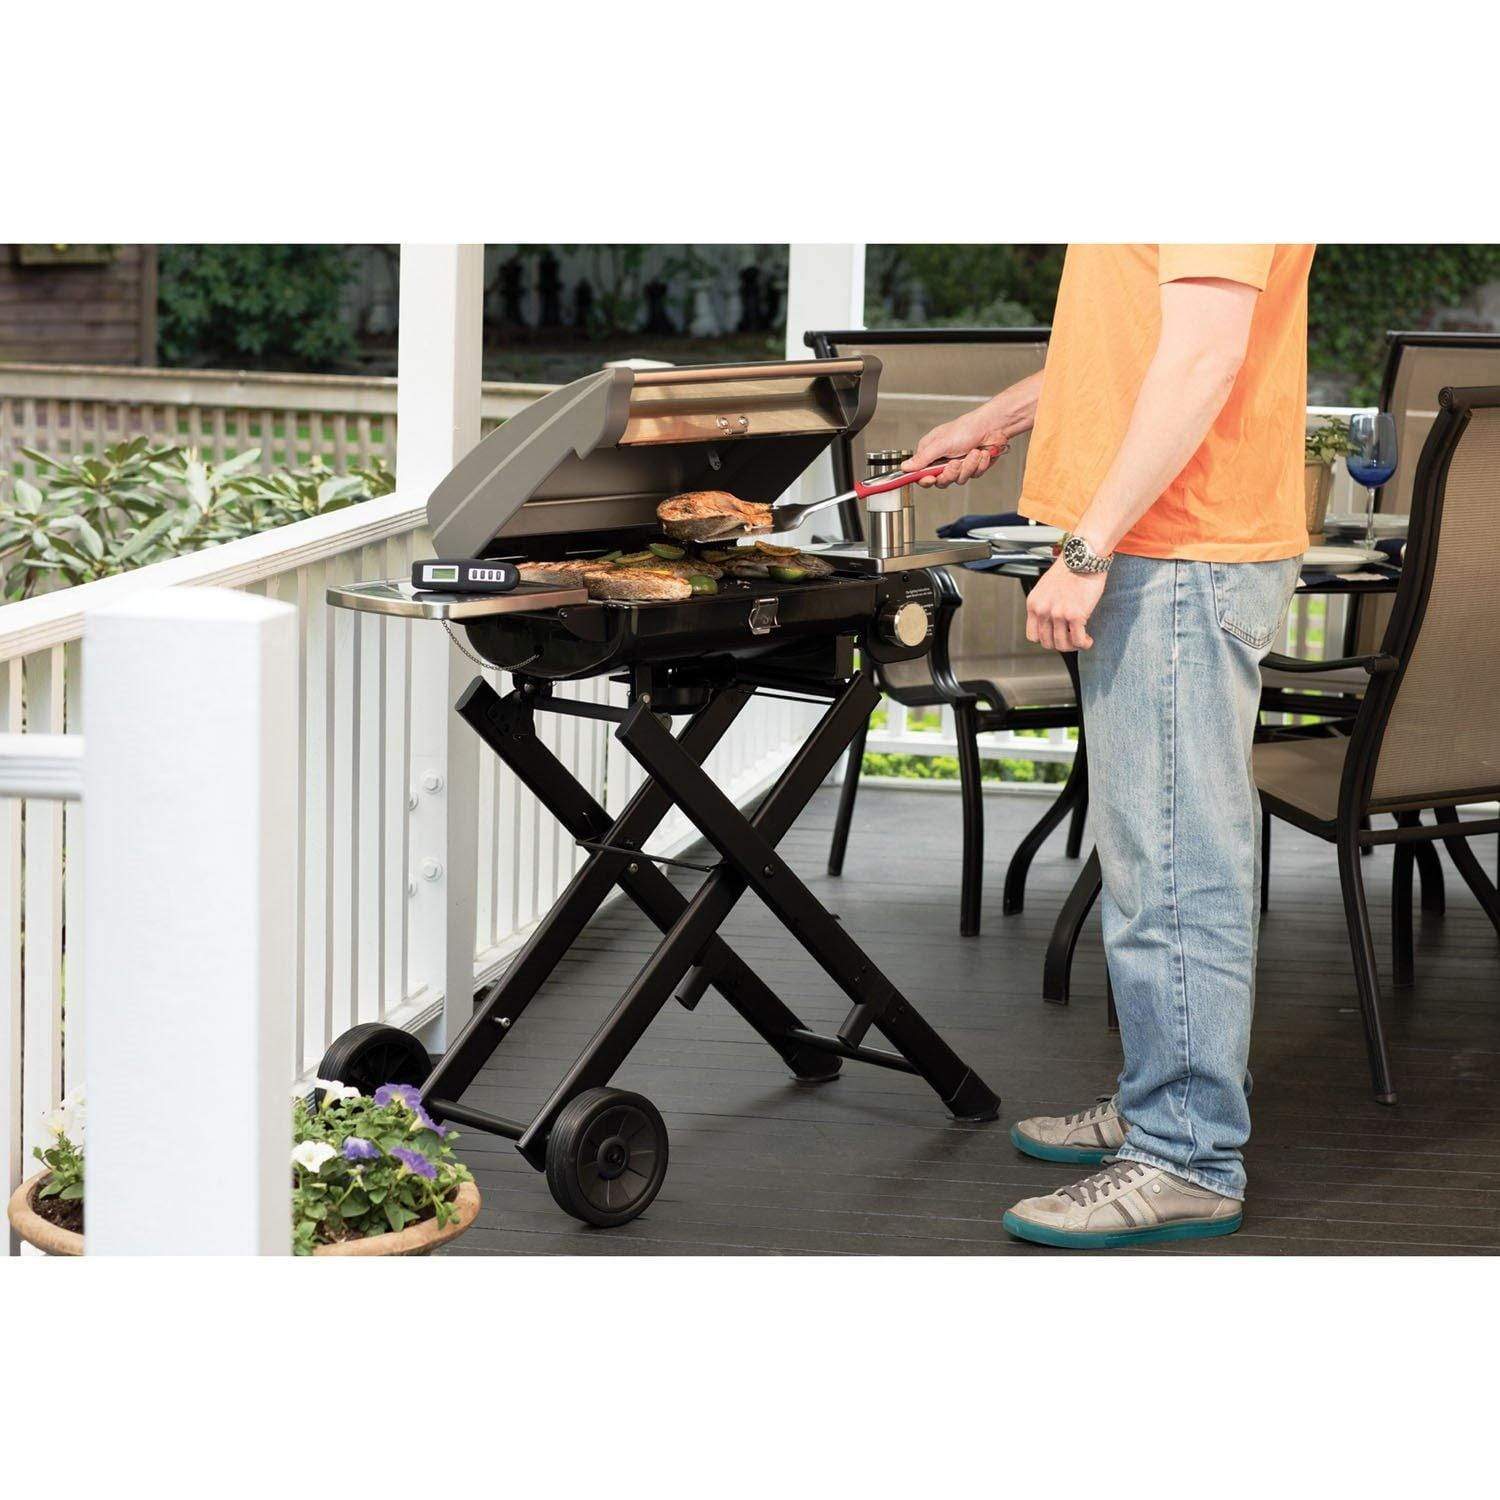 CEG980 by Cuisinart - Outdoor Electric Grill with VersaStand